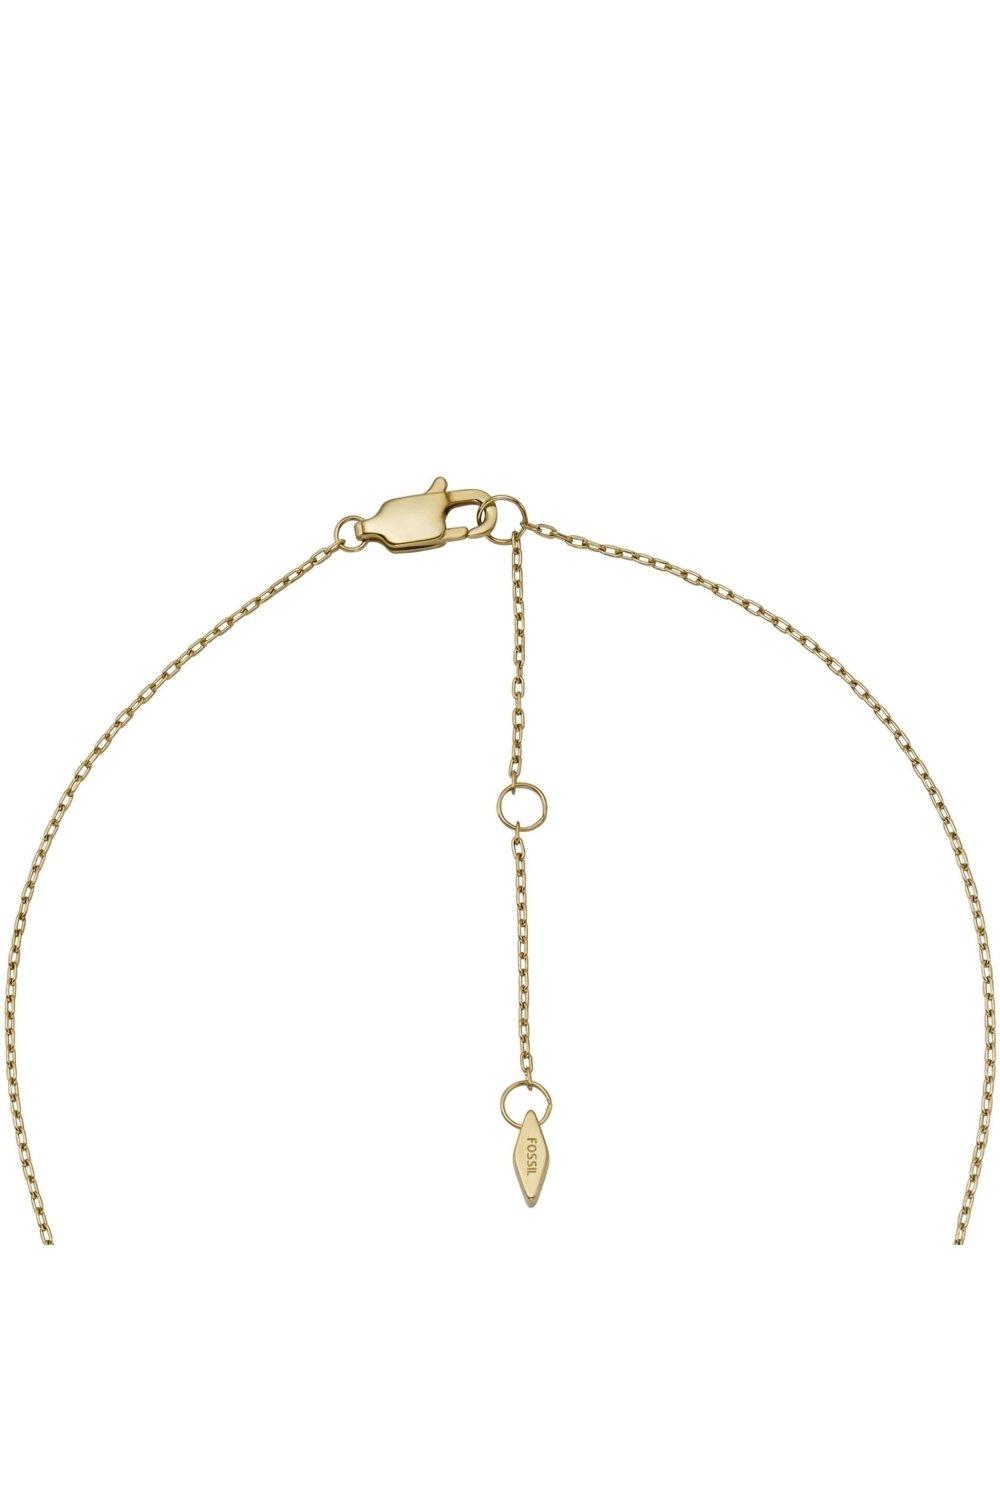 Jewellery | Sadie Stainless Steel Necklace - Jf04544710 | Fossil